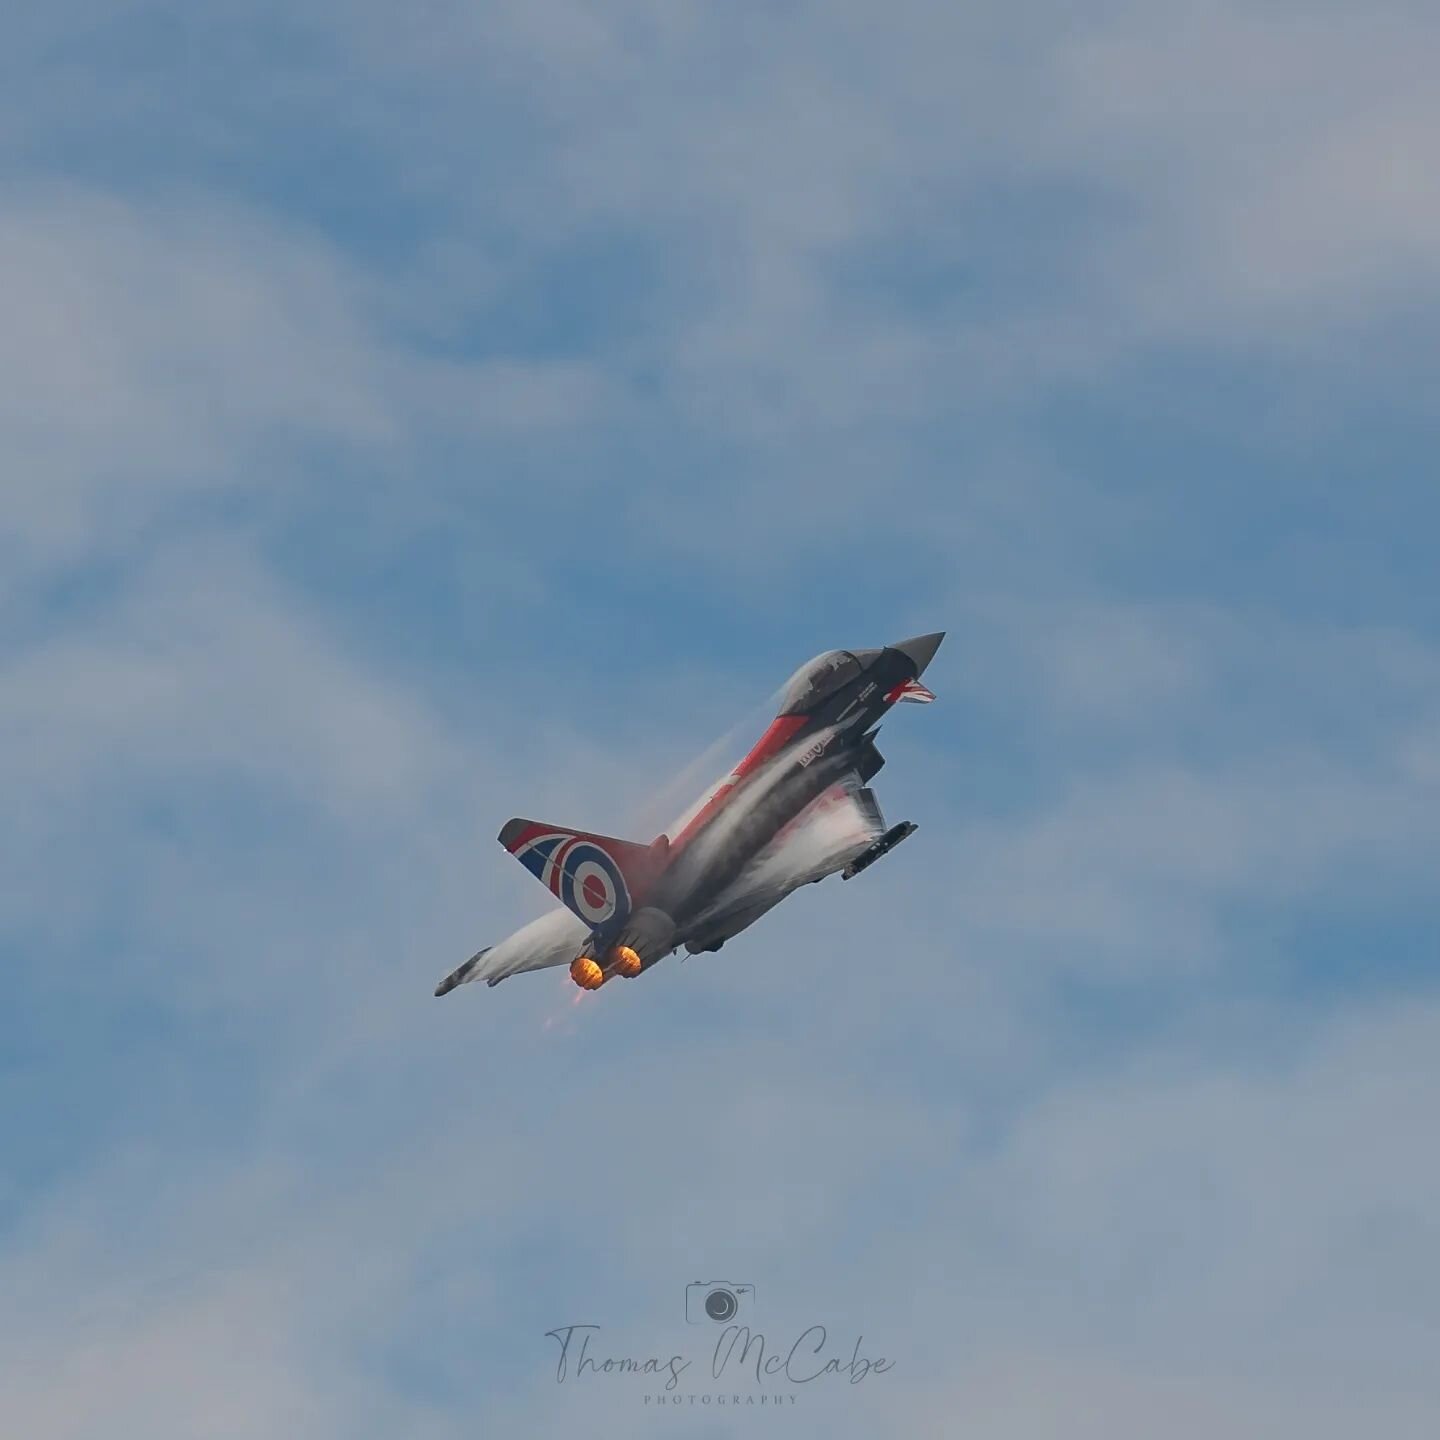 This year ayr welcomed back the airshow. This is two of my favourite black jack typhoon 

#aviationphotography
#blackjacktyphoon
#ayr #airshow #airshowphotography #thomasmccabephotography #southayshire #nikon